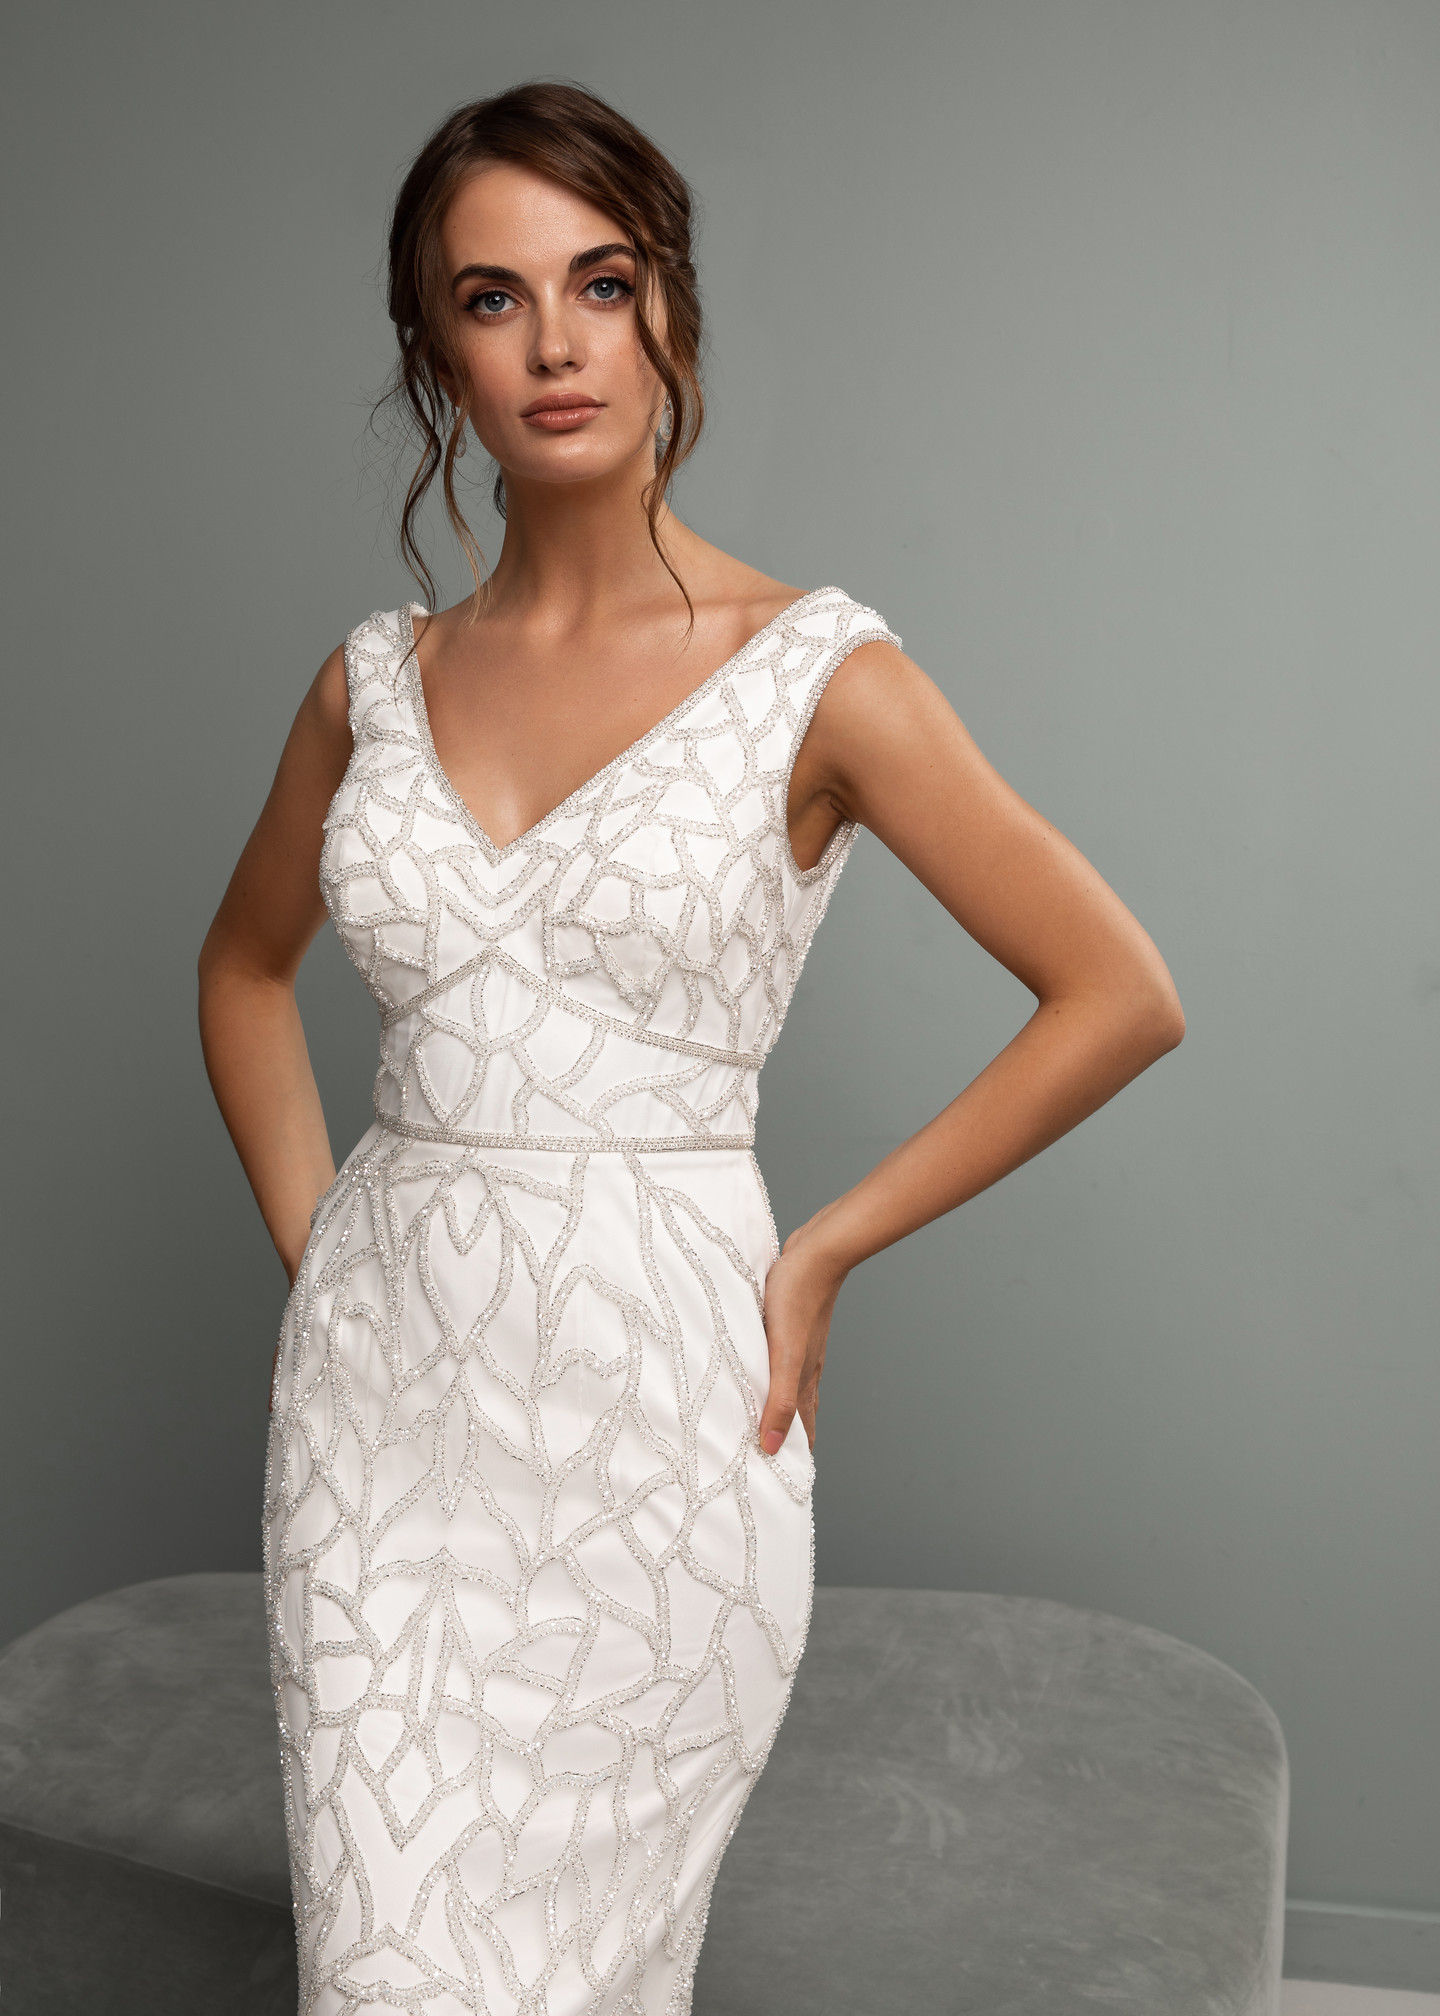 Tristy dress, 2021, couture, dress, bridal, off-white, embroidery, sheath silhouette, train